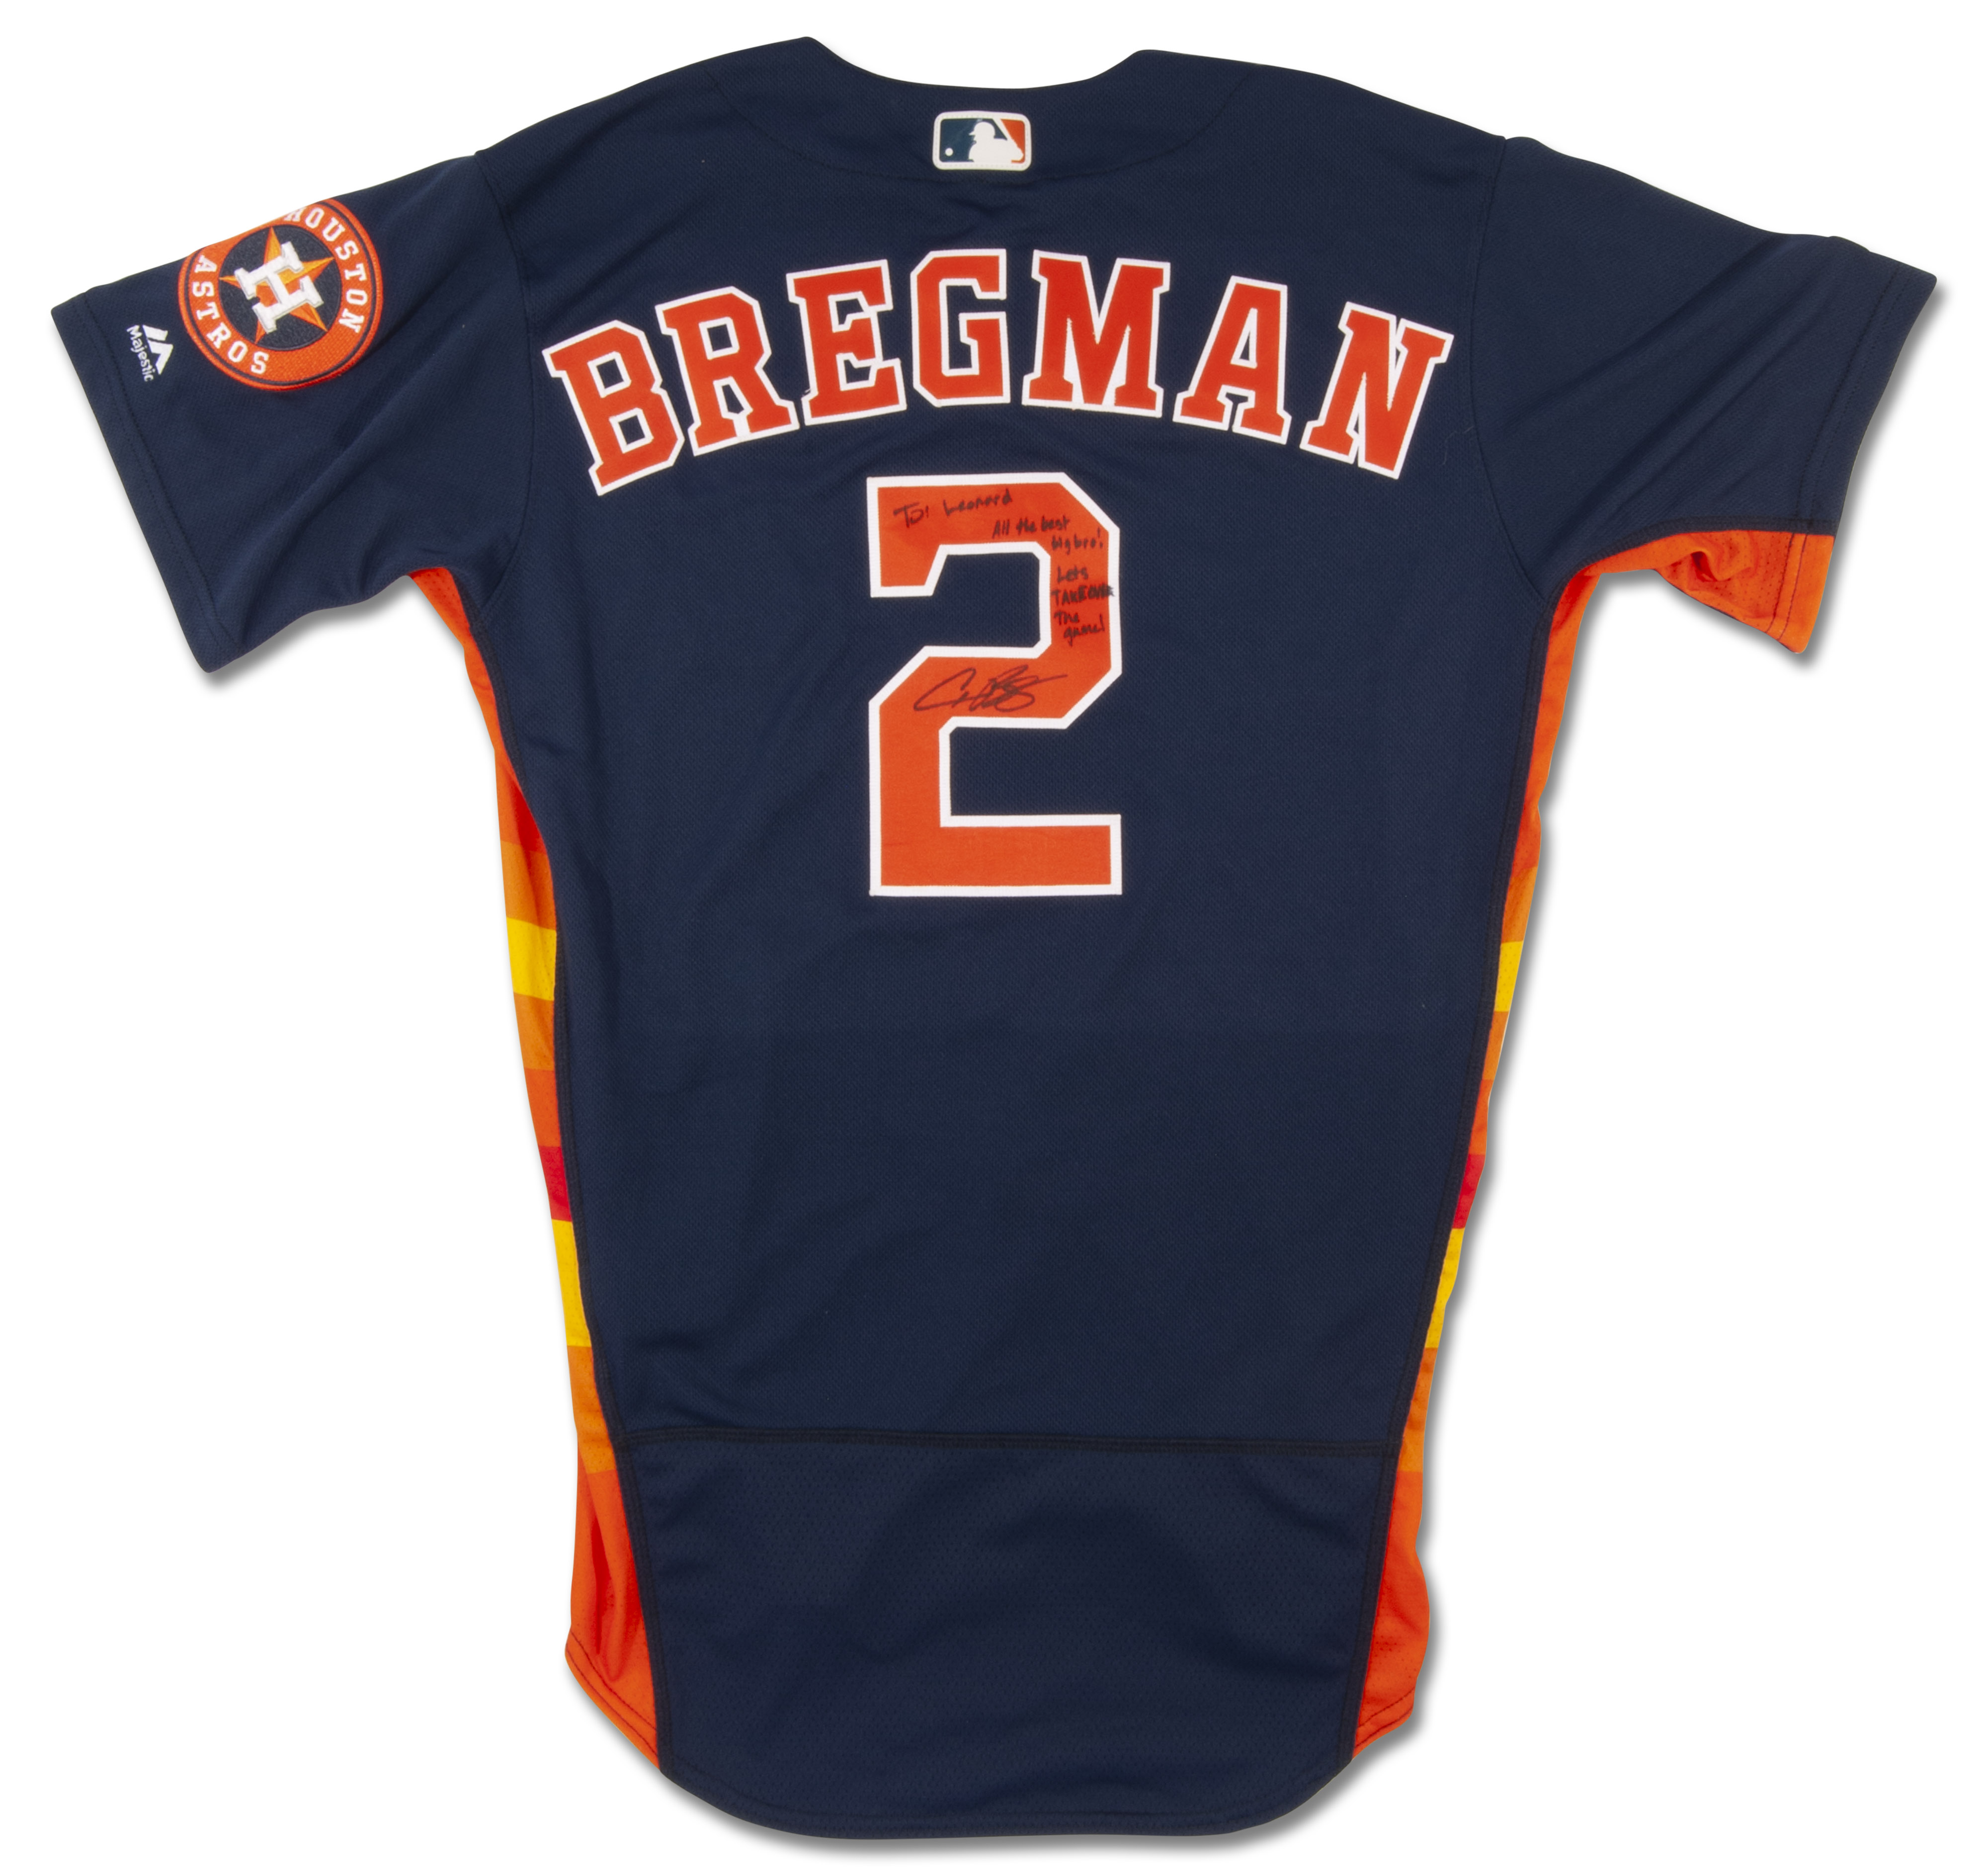 Lot Detail - ALEX BREGMAN HOUSTON ASTROS AUTOGRAPHED AND INSCRIBED GAME  WORN JERSEY - BECKETT